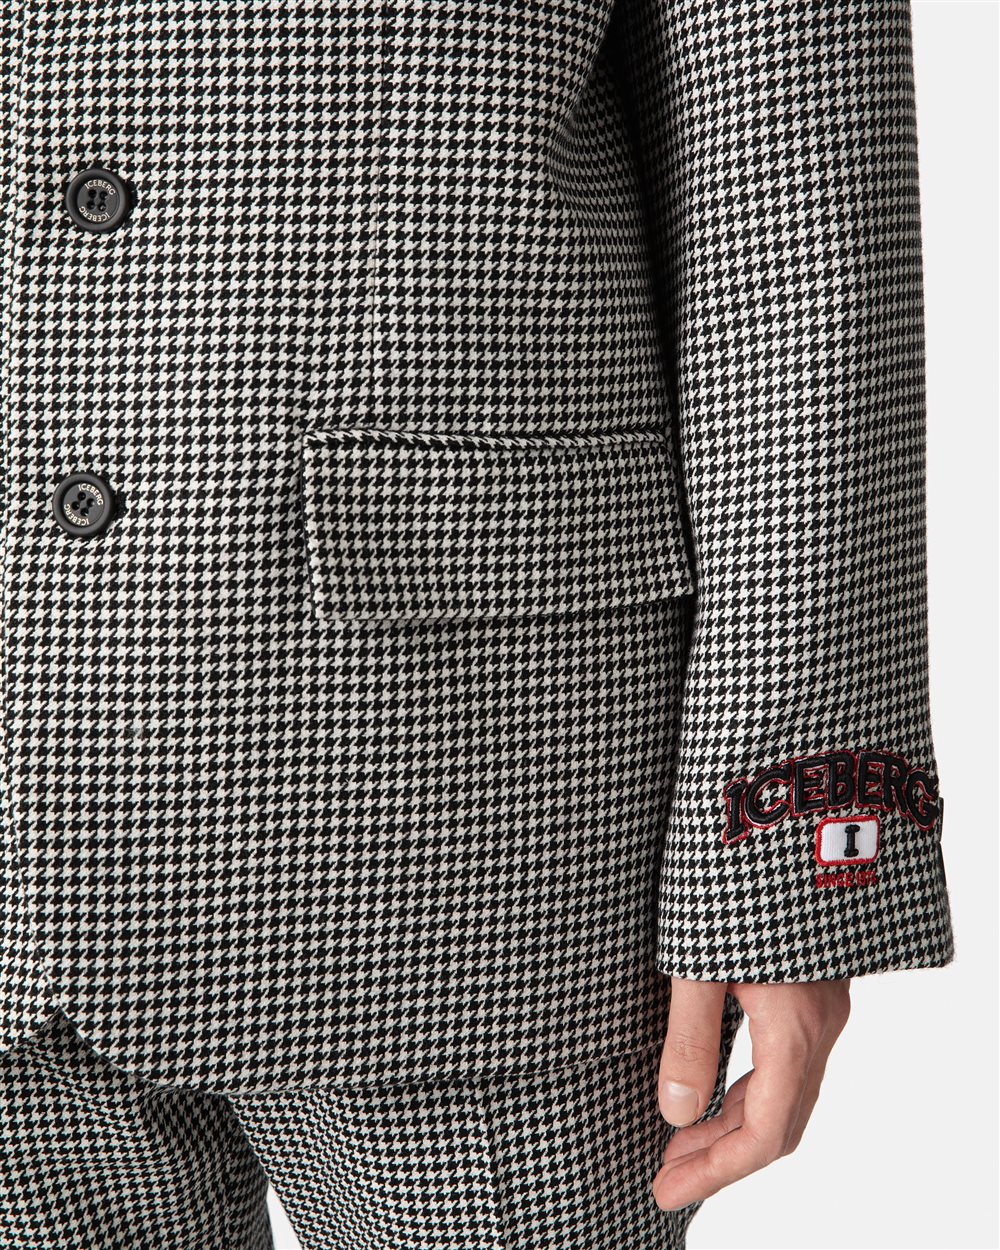 Single-breasted jacket with piede de poule pattern - Iceberg - Official Website